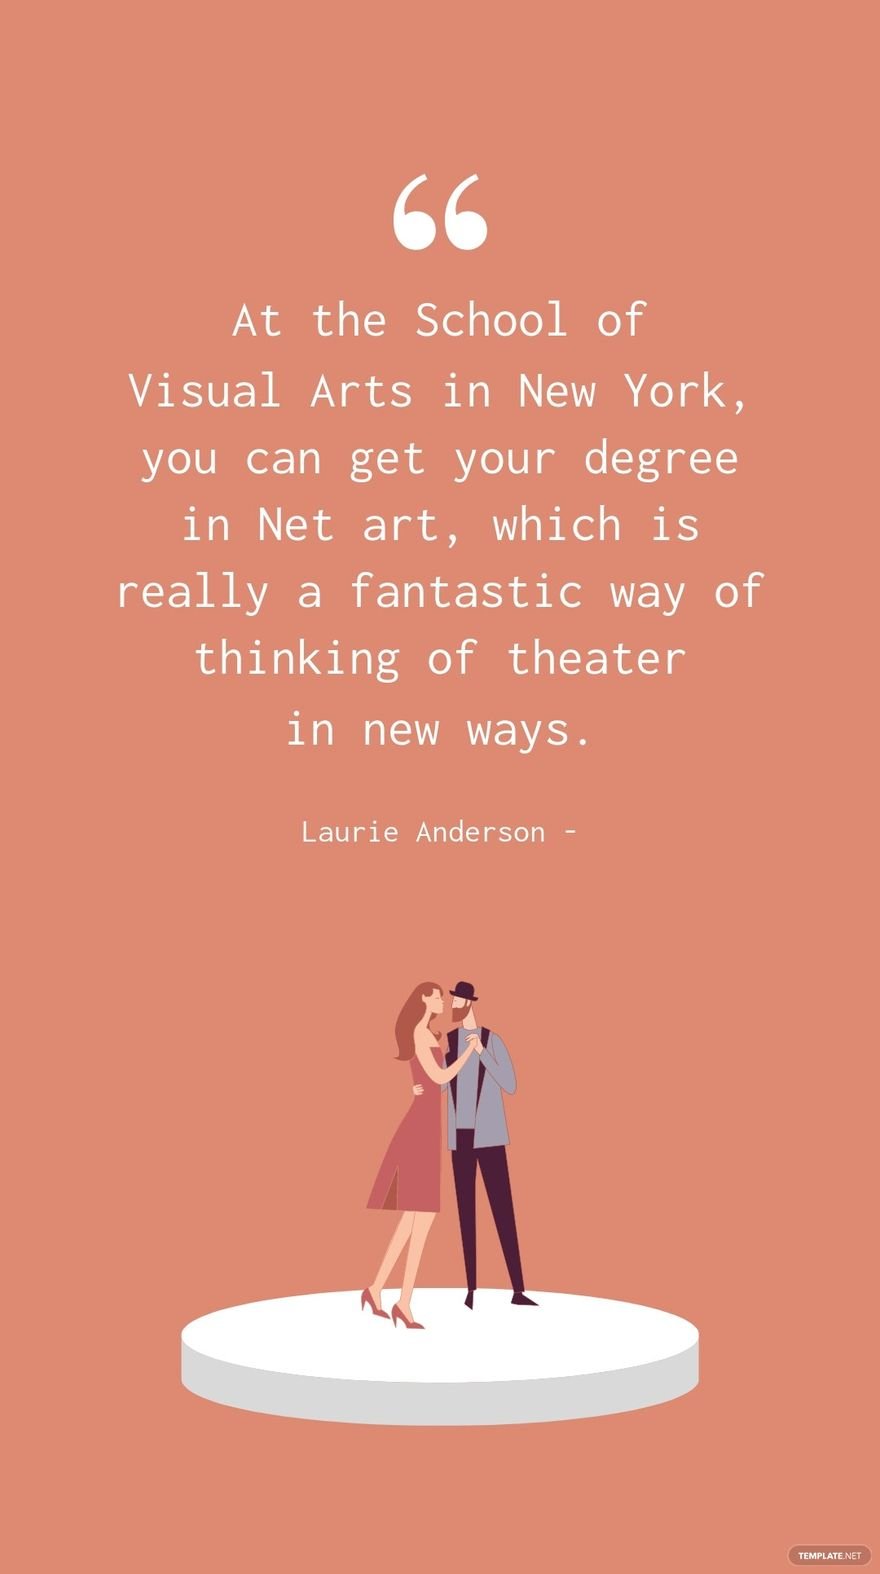 Free Laurie Anderson - At the School of Visual Arts in New York, you can get your degree in Net art, which is really a fantastic way of thinking of theater in new ways. in JPG